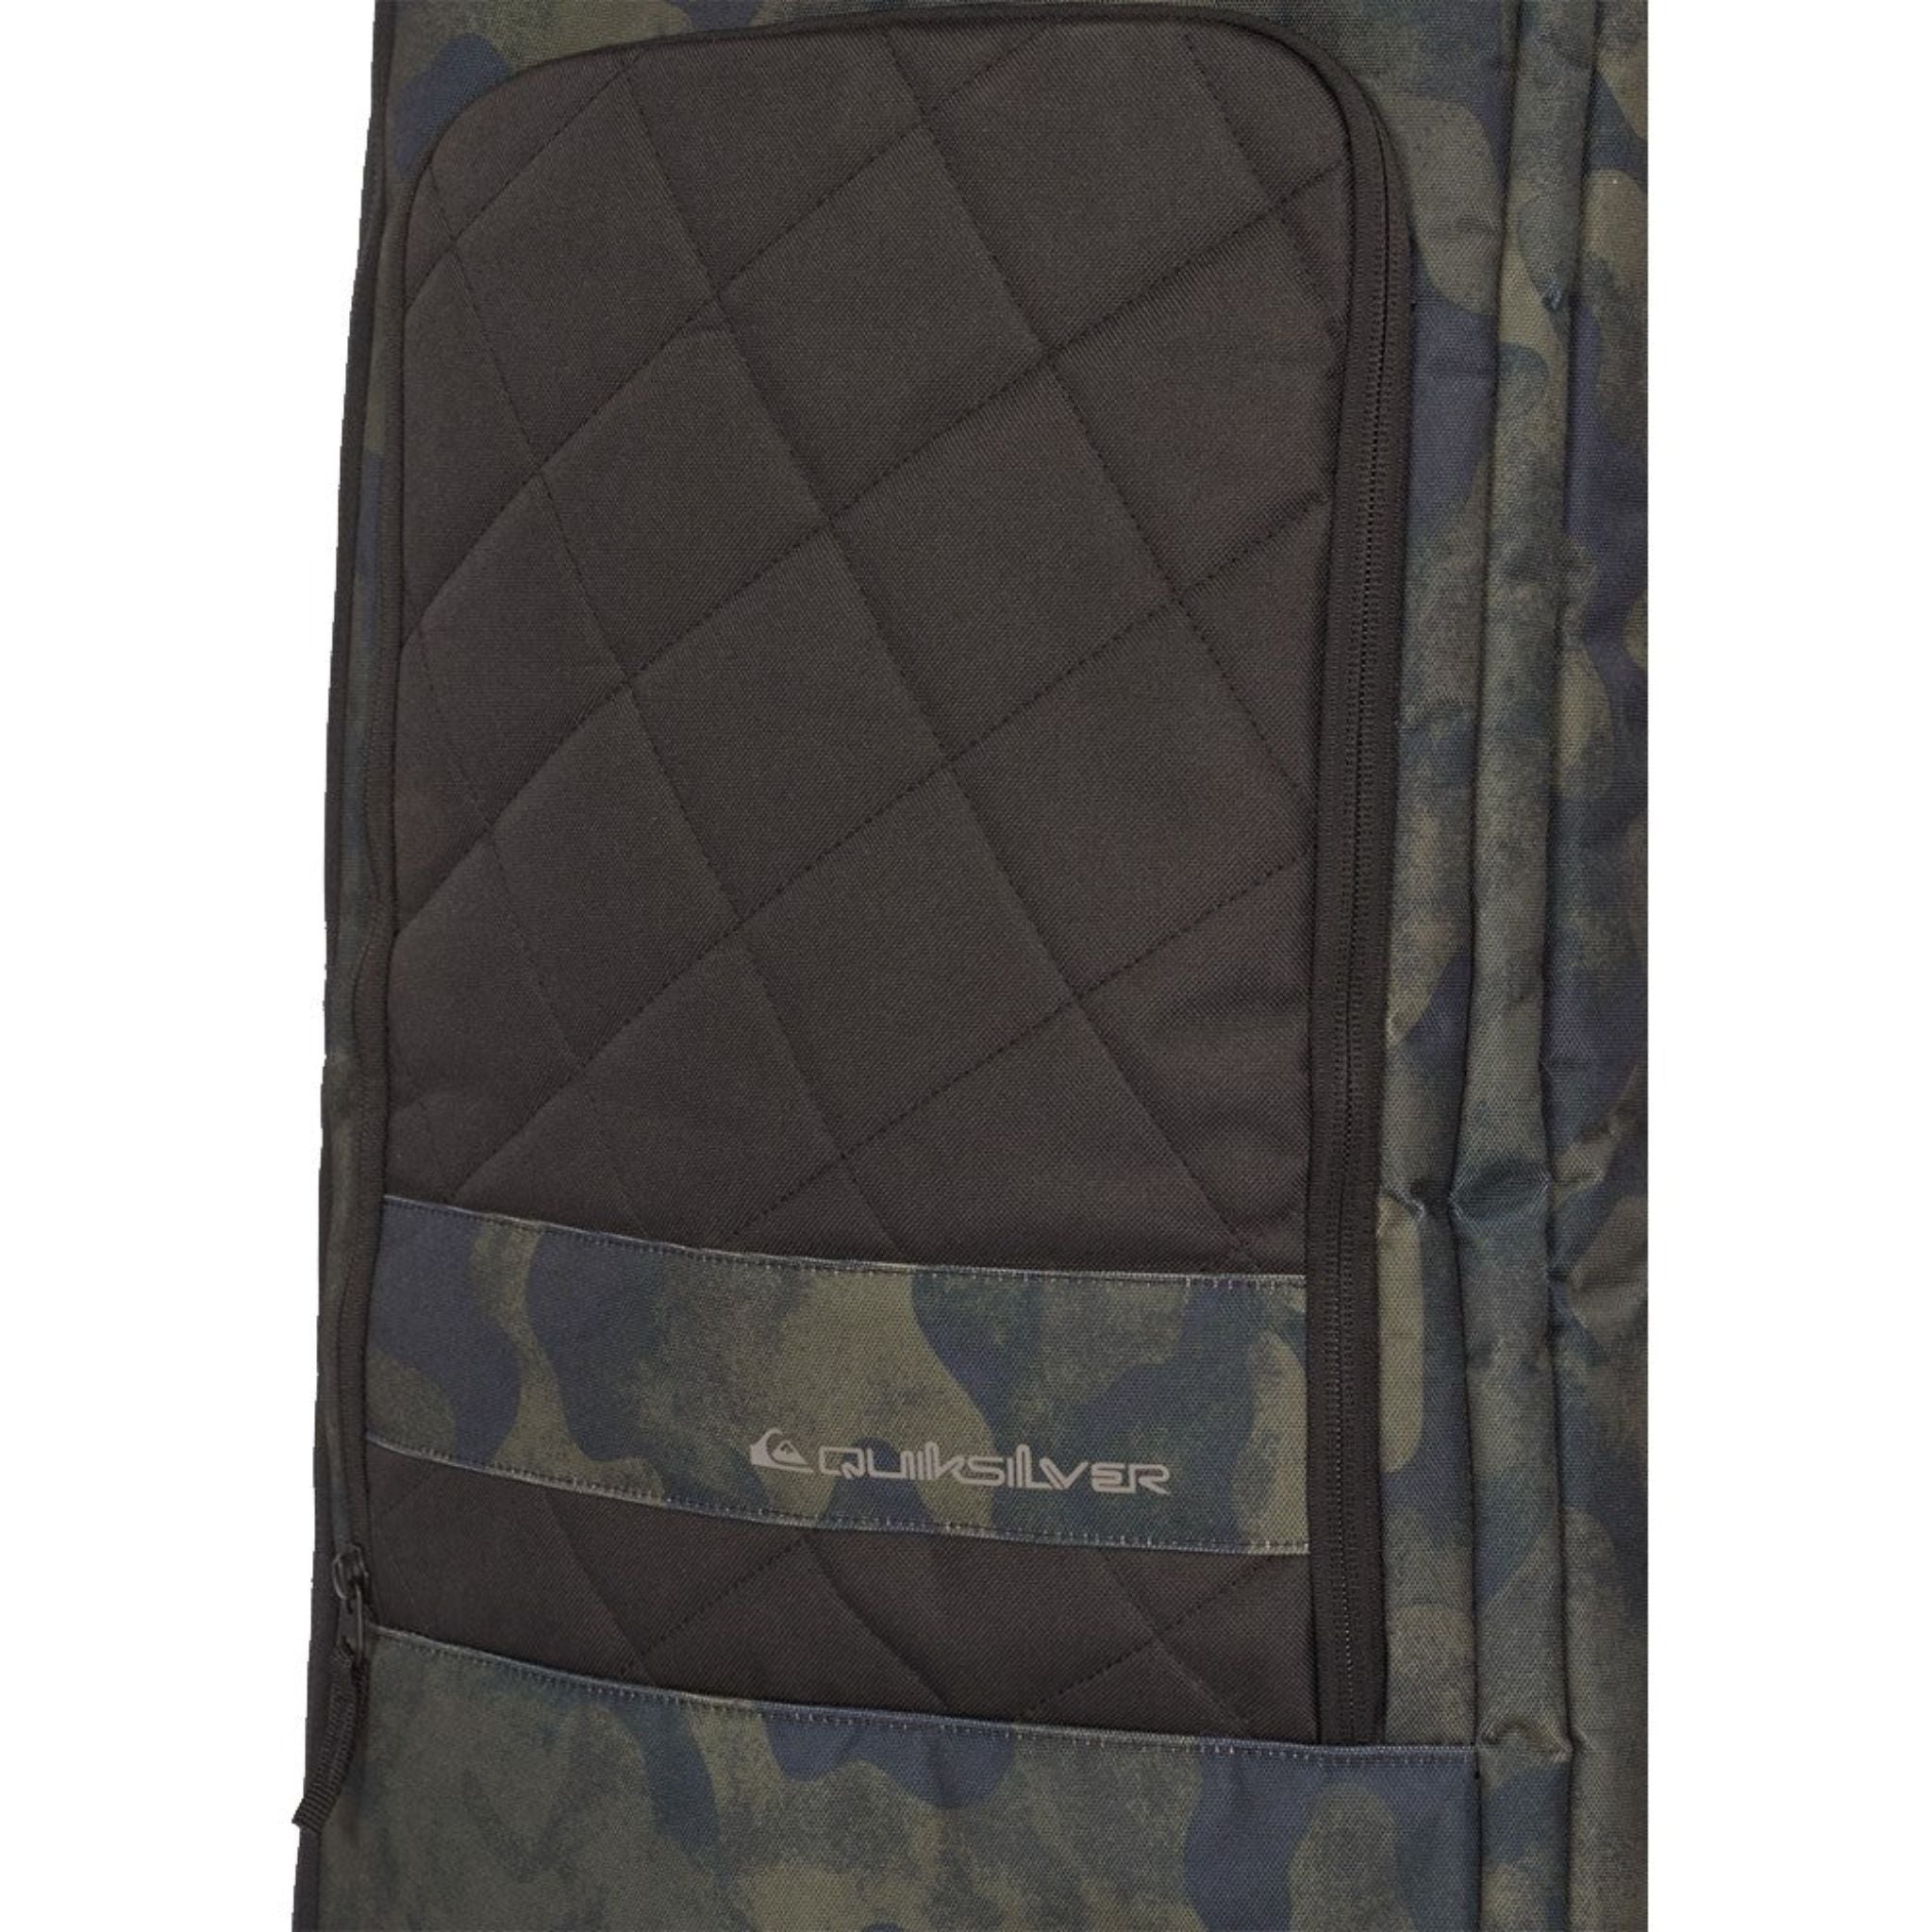 Quiksilver Platted Board Bag.